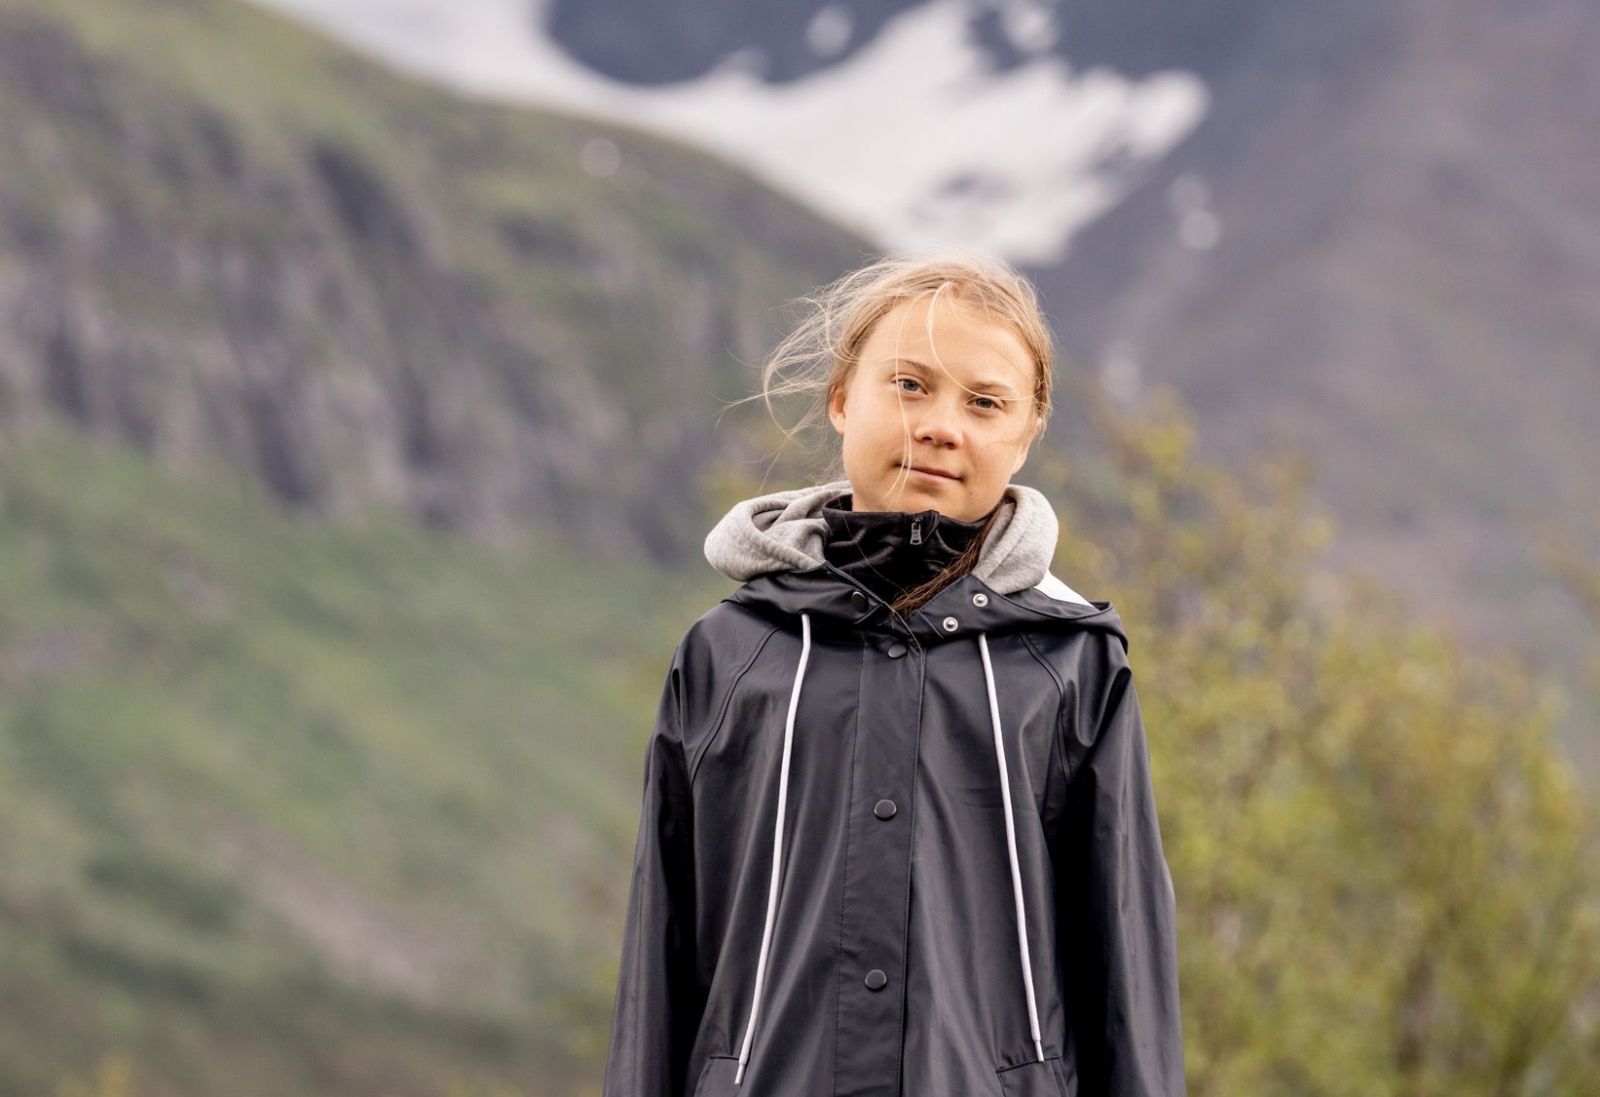 epa09342983 Climate activist Greta Thunberg poses for a photo by the Ahkka mountain at the world heritage site of the Laponia area in Sapmi, Sweden, 13 July 2021.  EPA/CARL-JOHAN UTSI  SWEDEN OUT